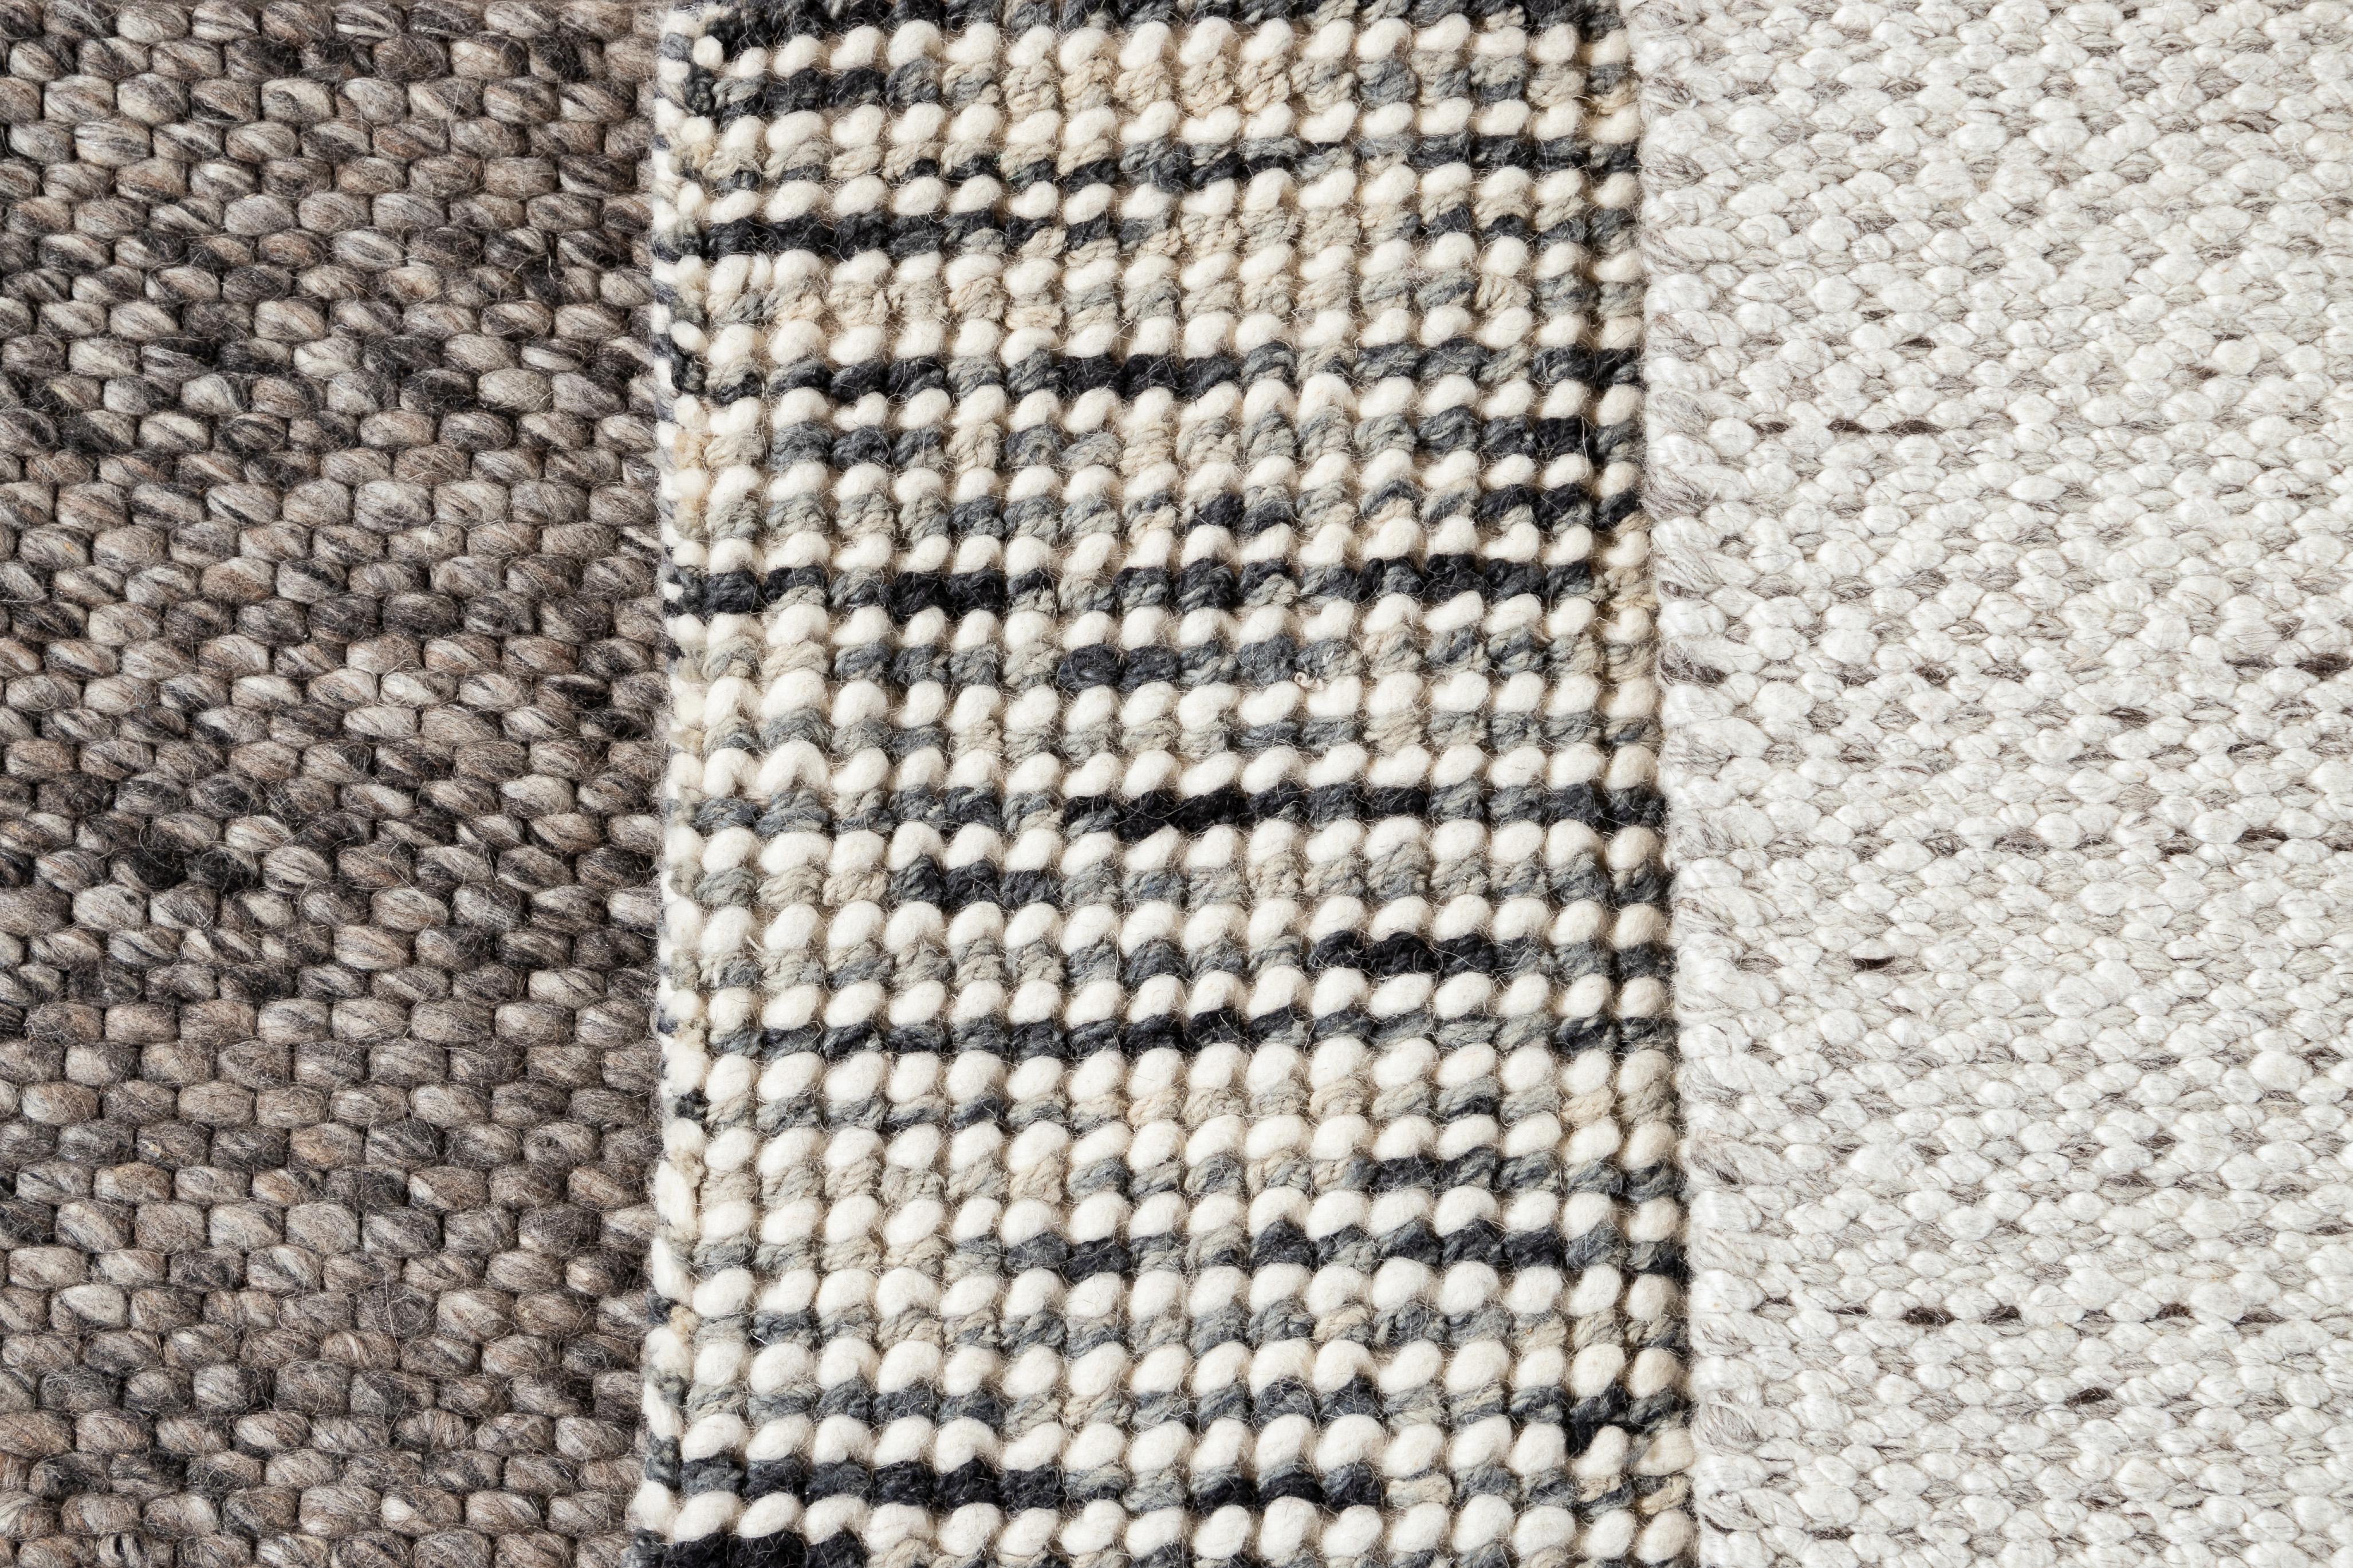 Handwoven wool textured custom rug in varying neutral shades. Custom sizes and colors made-to-order.

Collection: Easton
Material: 100% wool
Lead time: Approx. 12 weeks
Available colors: Charcoal, Blue-Grey, Lt. Silver 
Made in India

Price